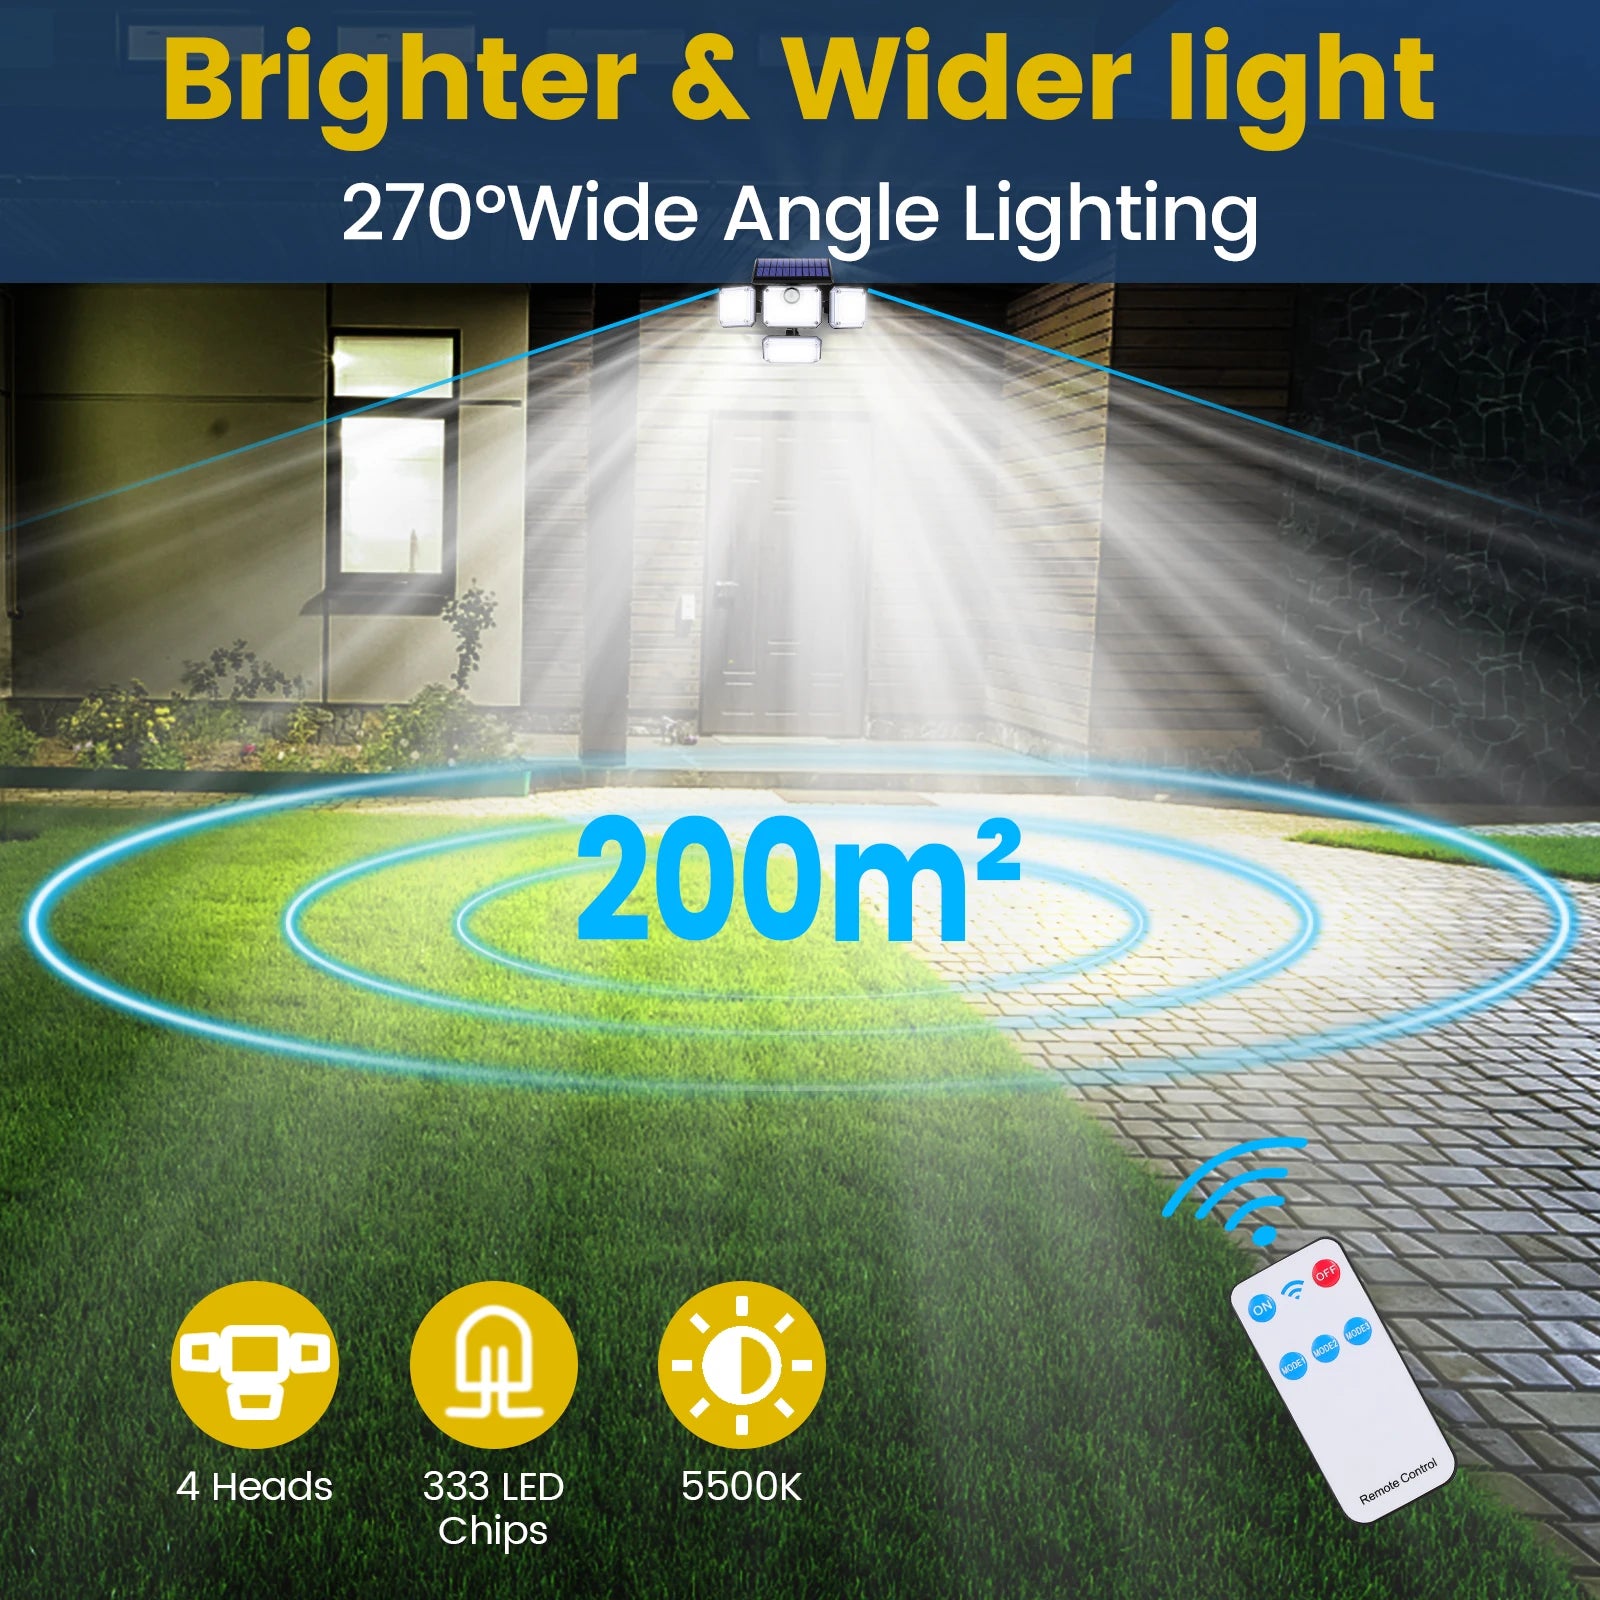 Solar Light, Outdoor LED lighting system with wide-angle view, motion sensor, and remote control.